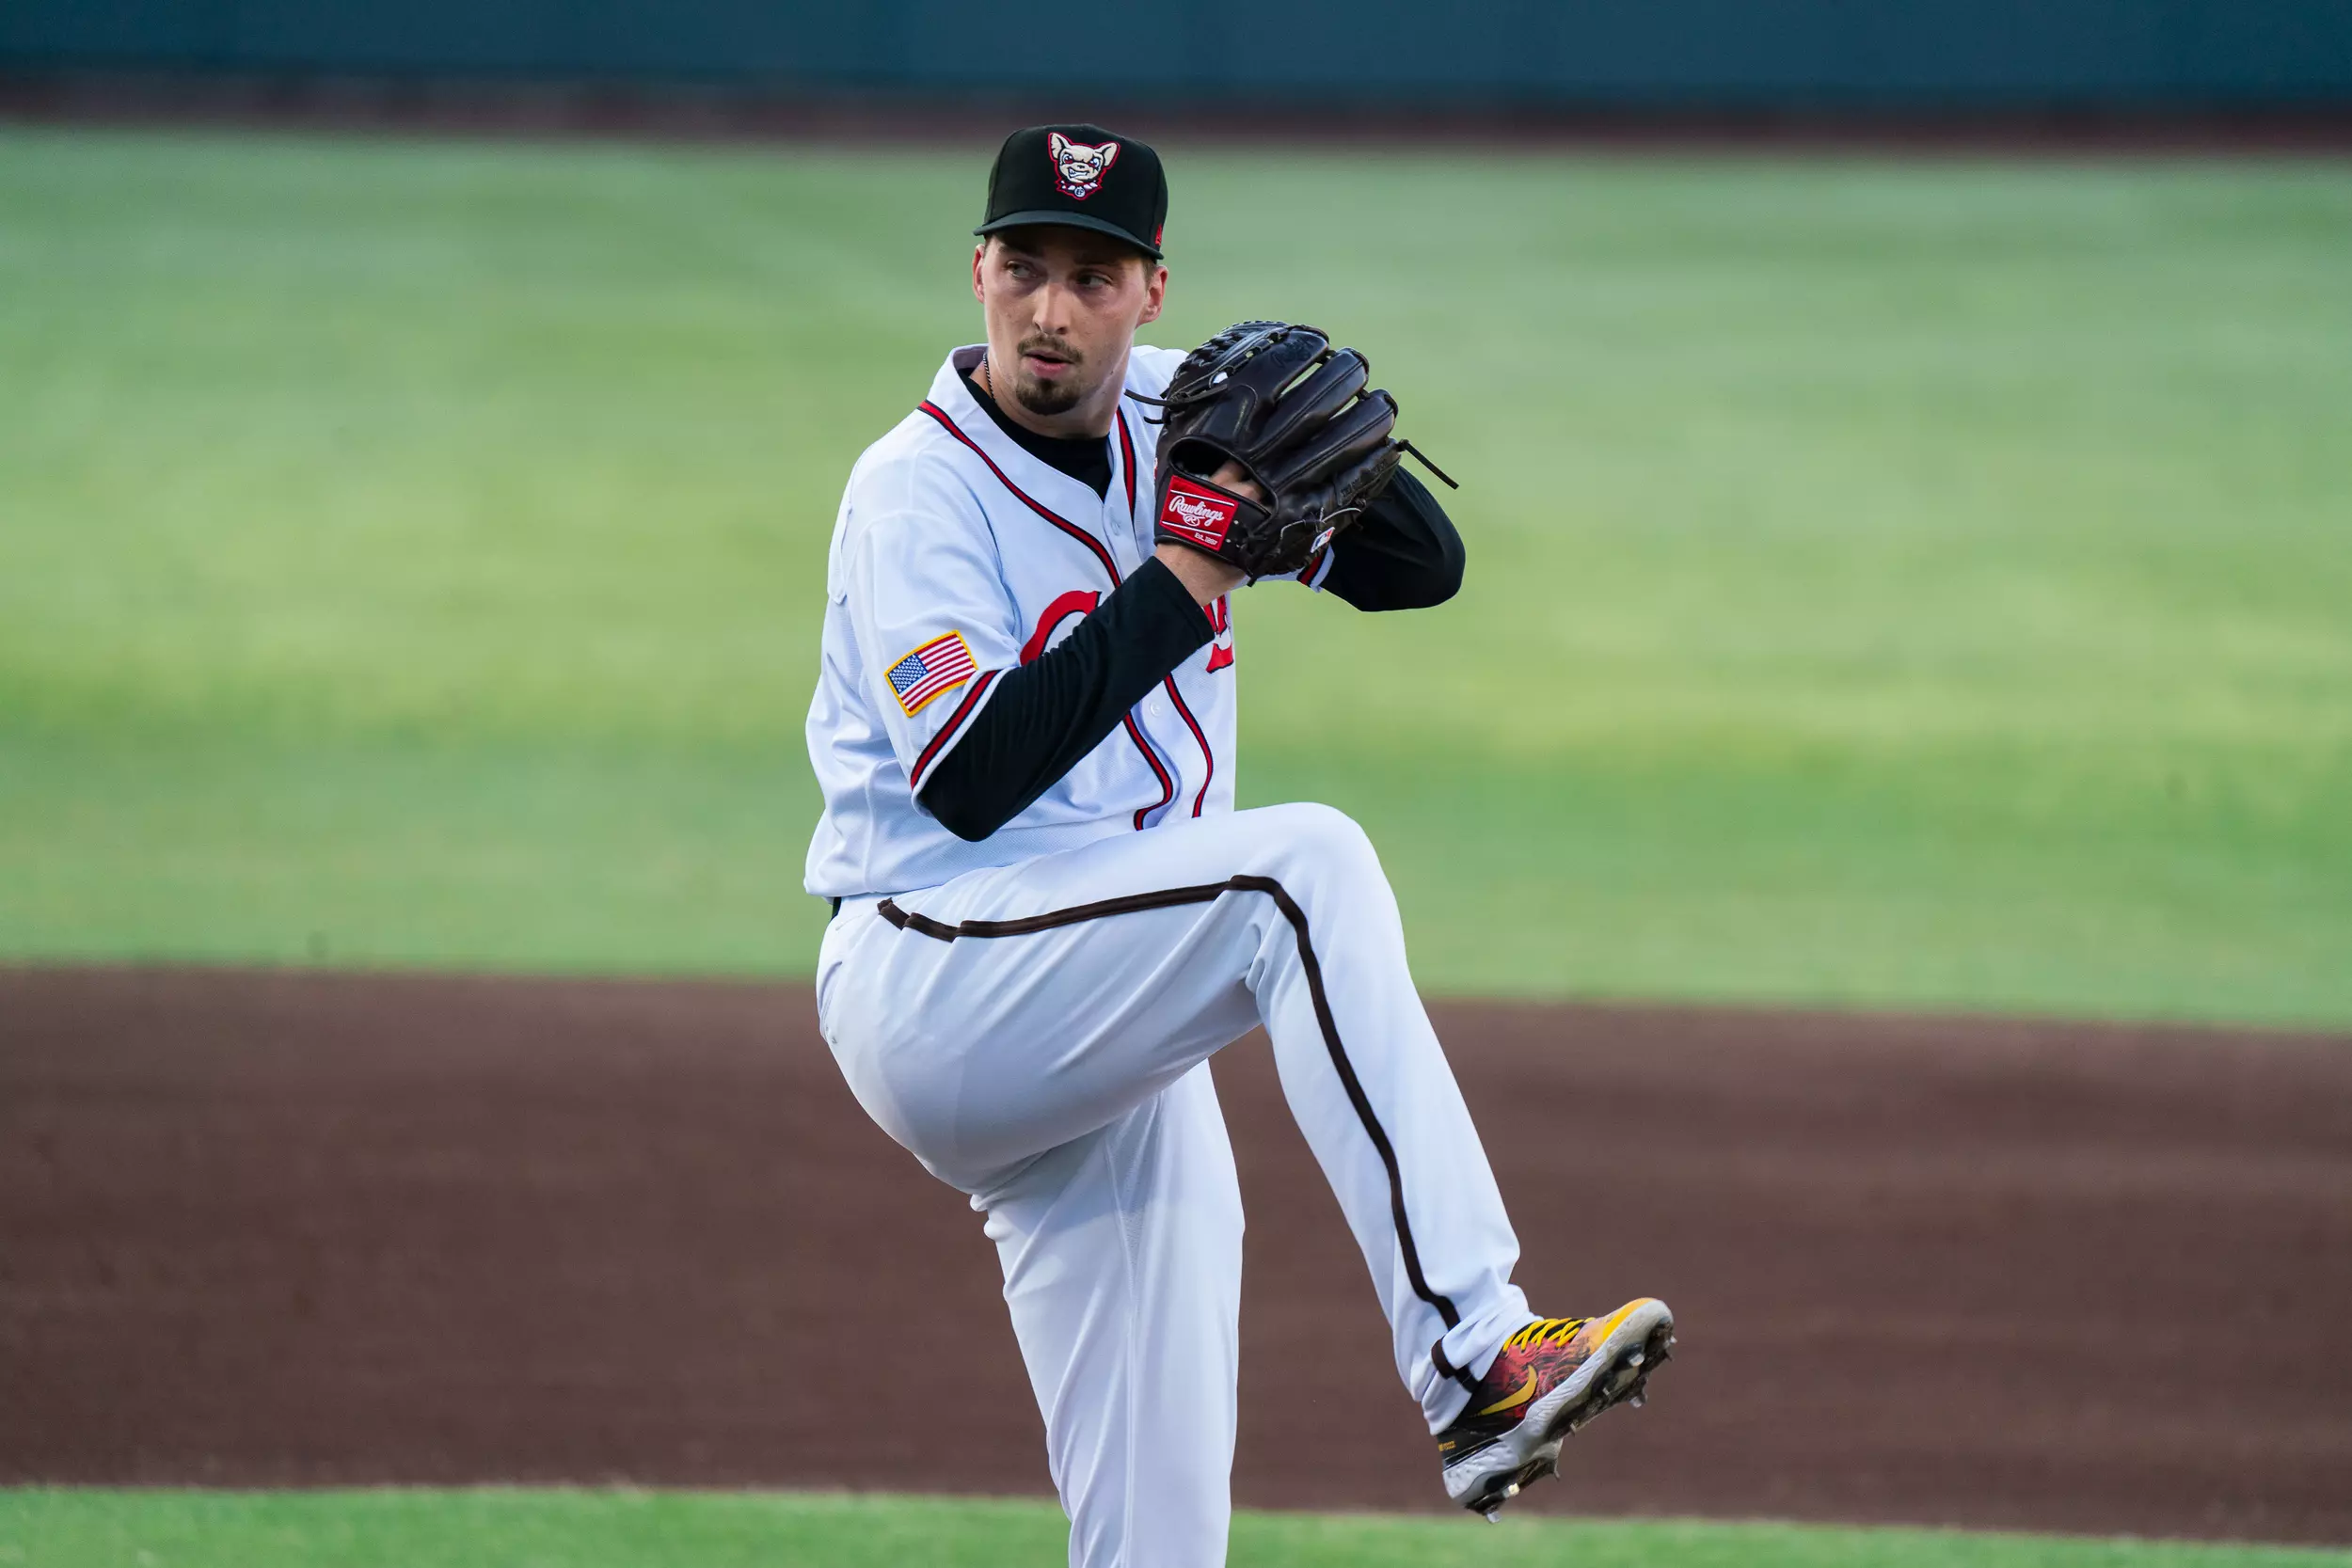 El Paso Chihuahuas Continue to Bark With Loaded Lineup